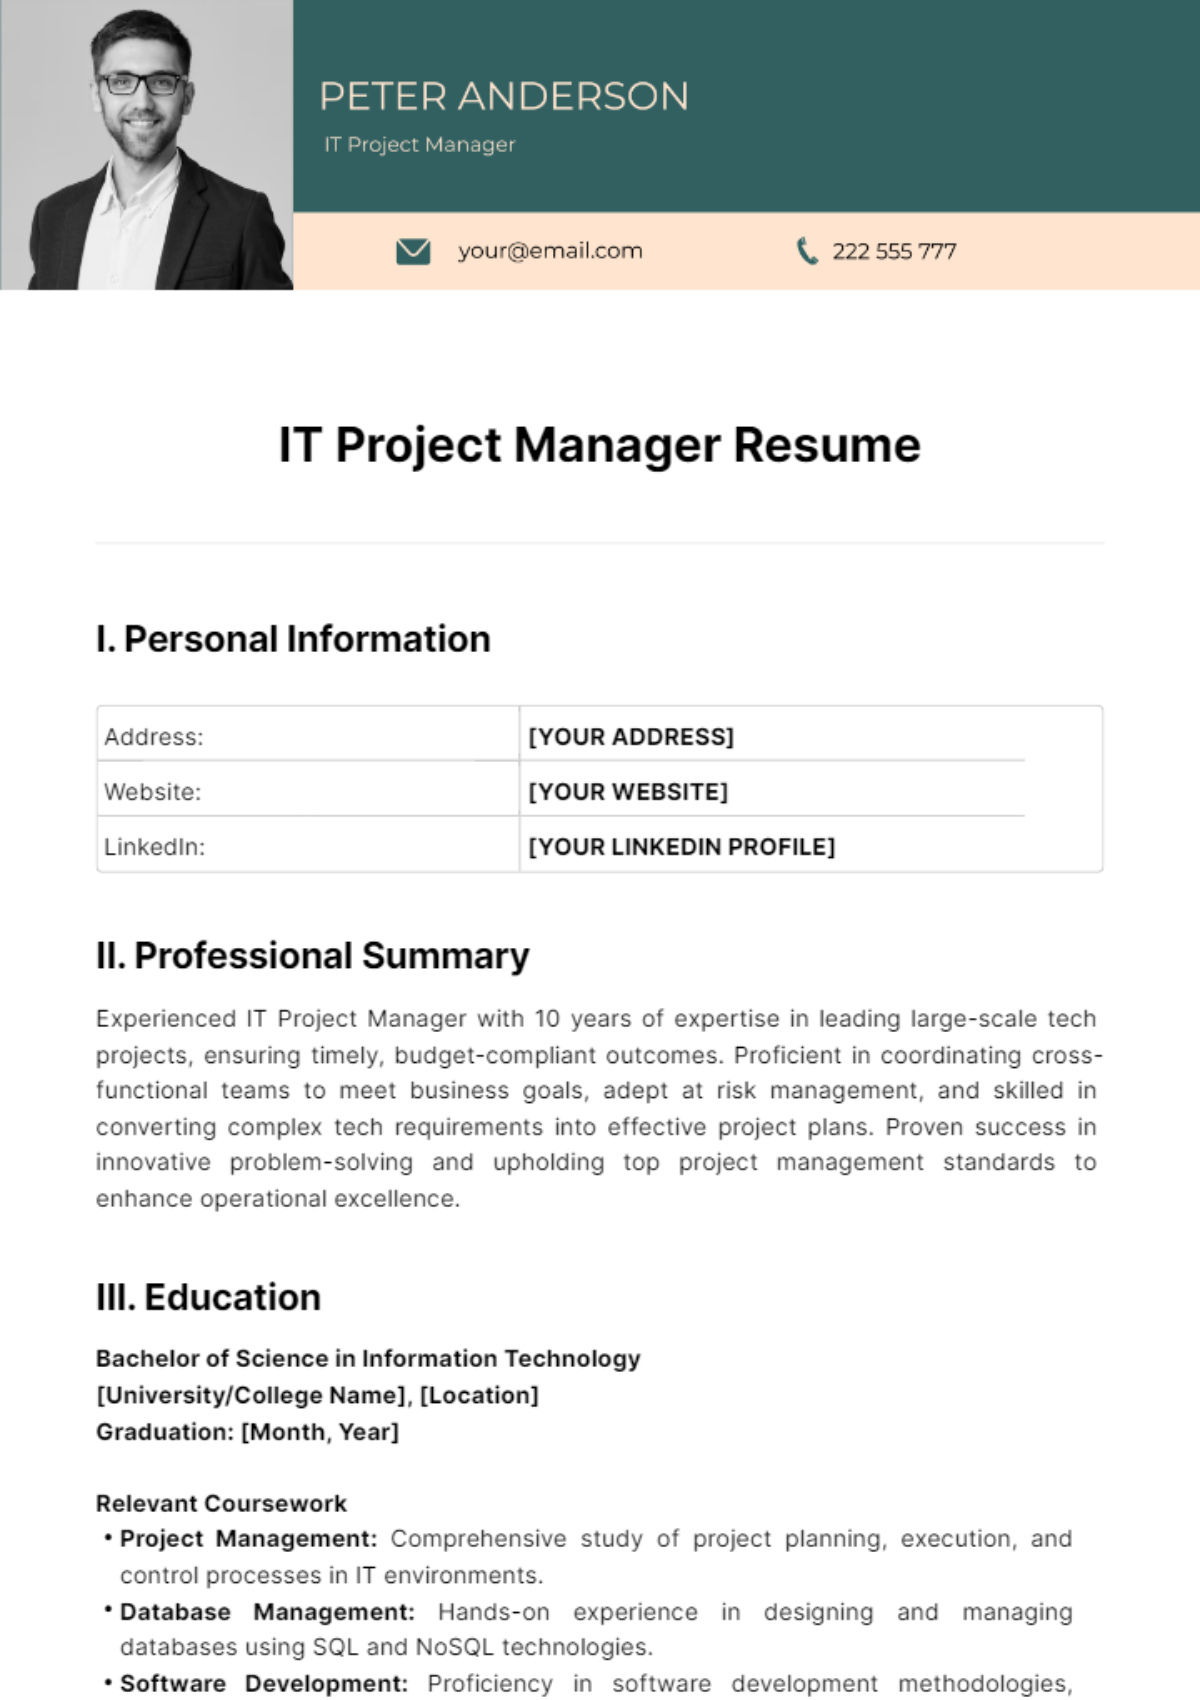 IT Project Manager Resume Template